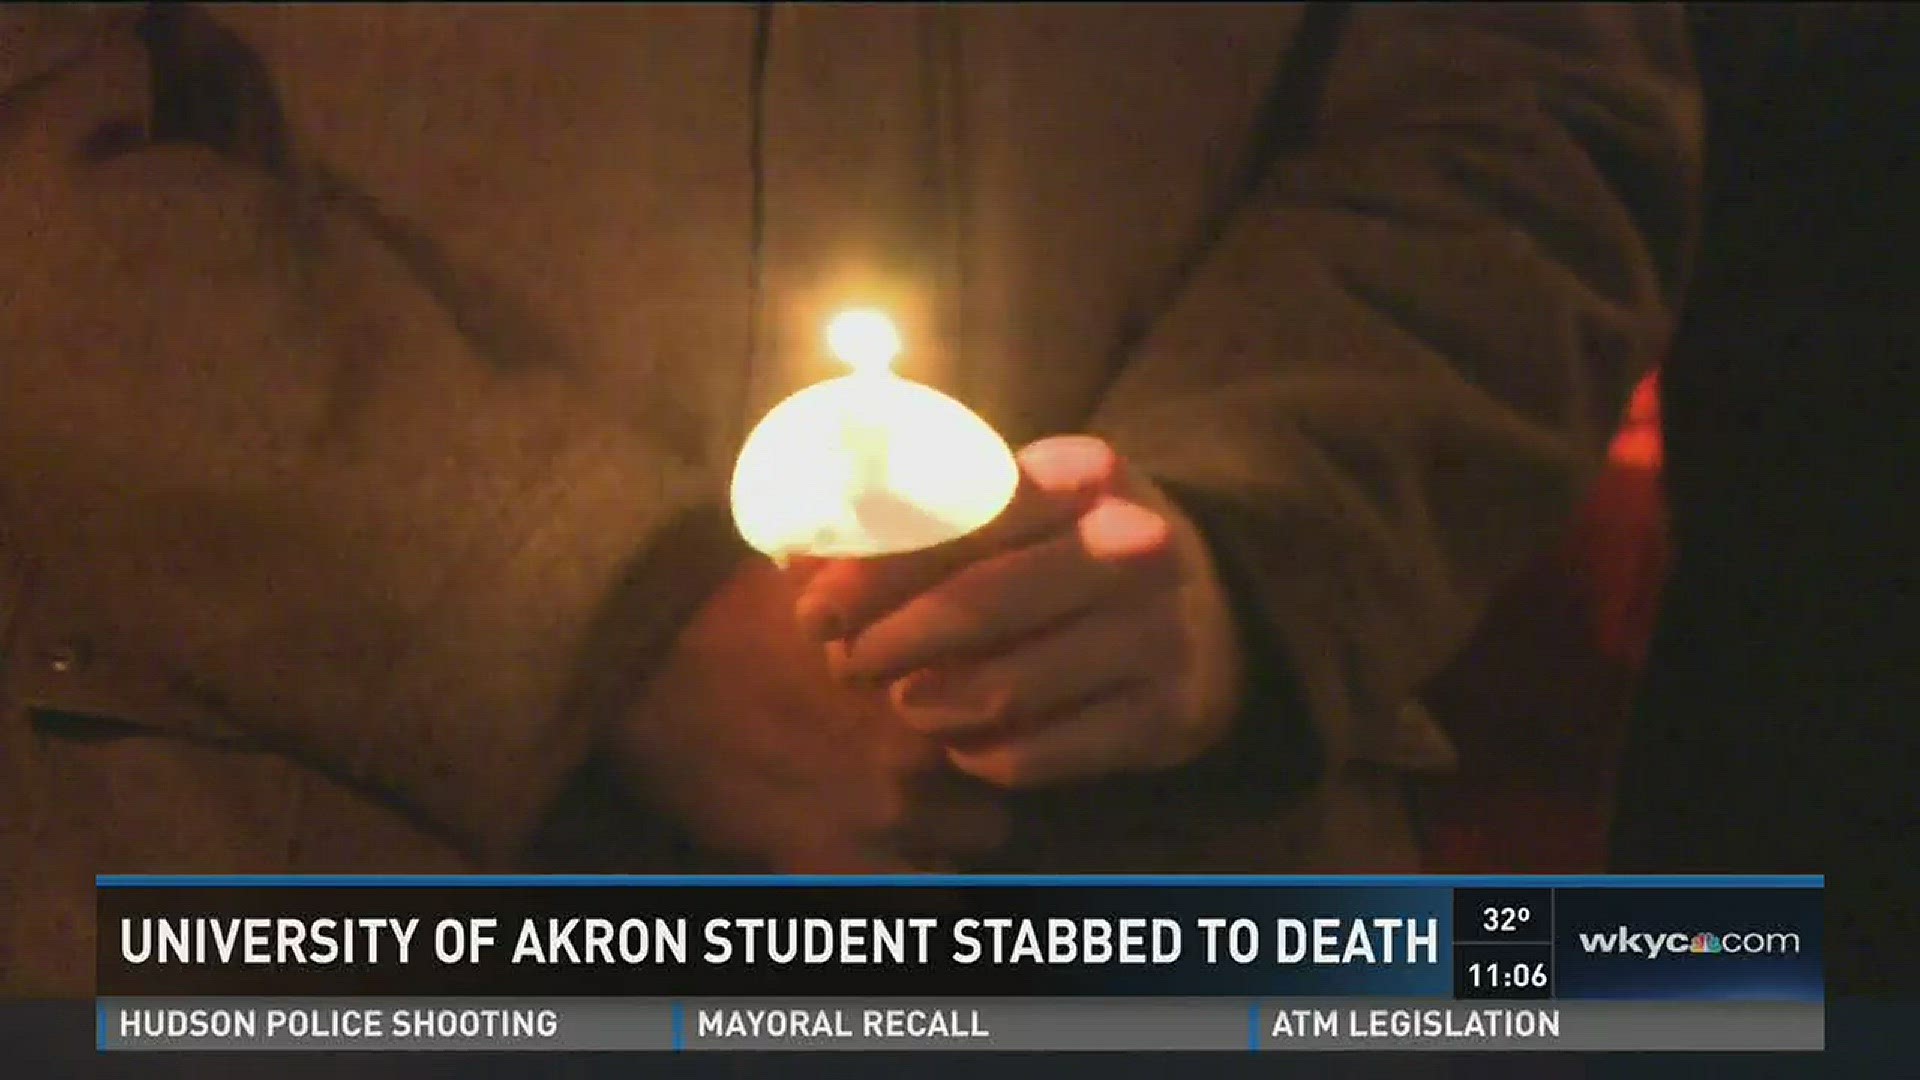 University of Akron student stabbed to death